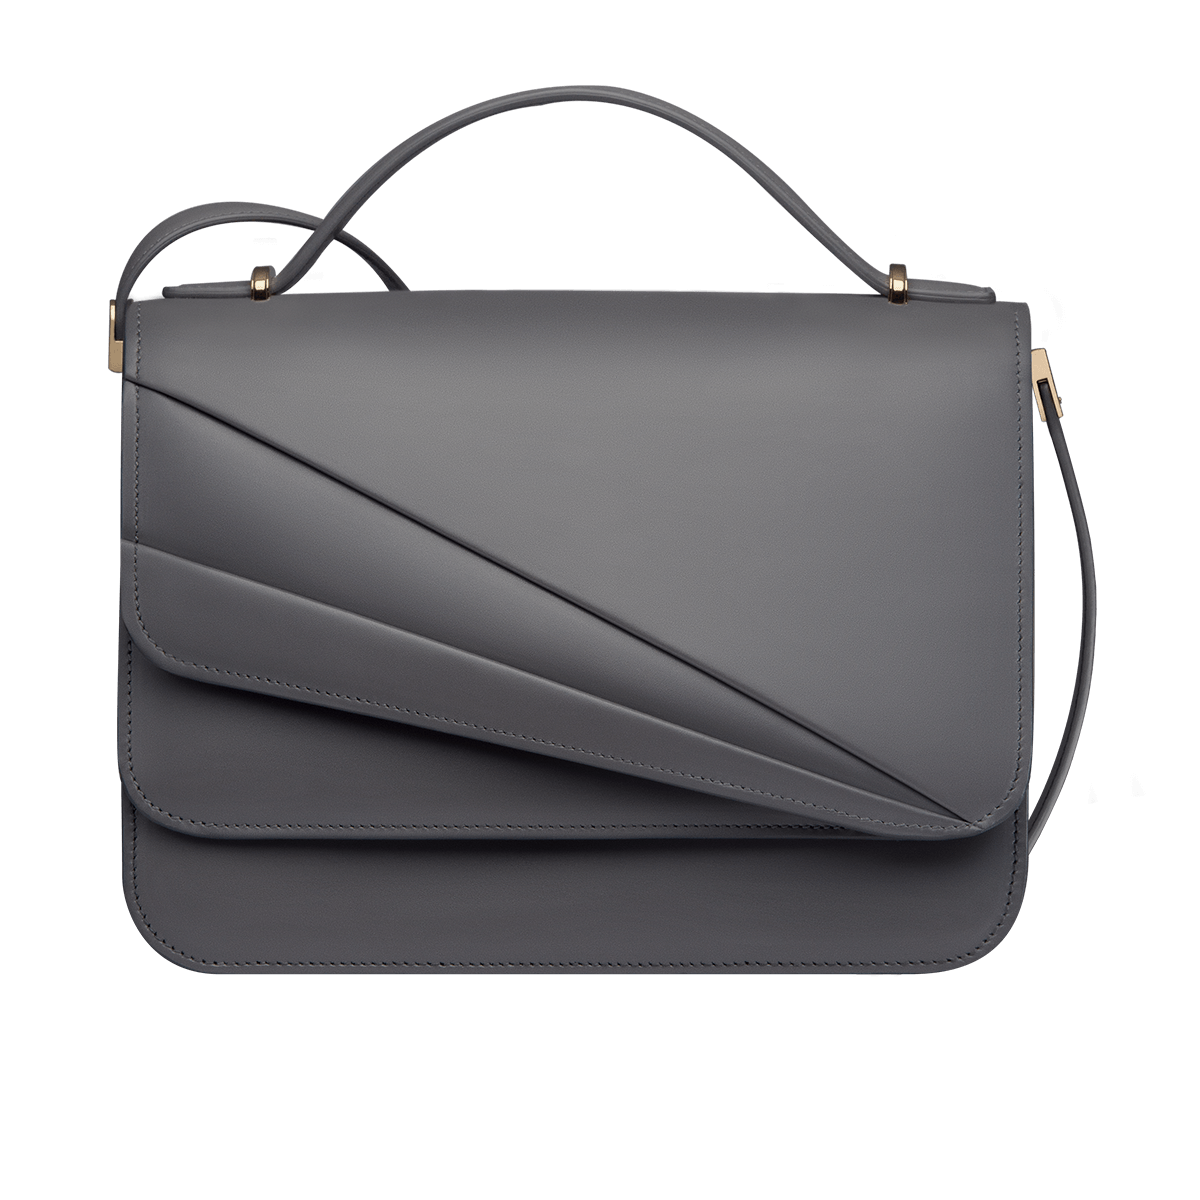 Gh18 Butterfly L Double Flap Grey Front 2 60868973 Bbcf 4a93 90bb 785a7aca836d